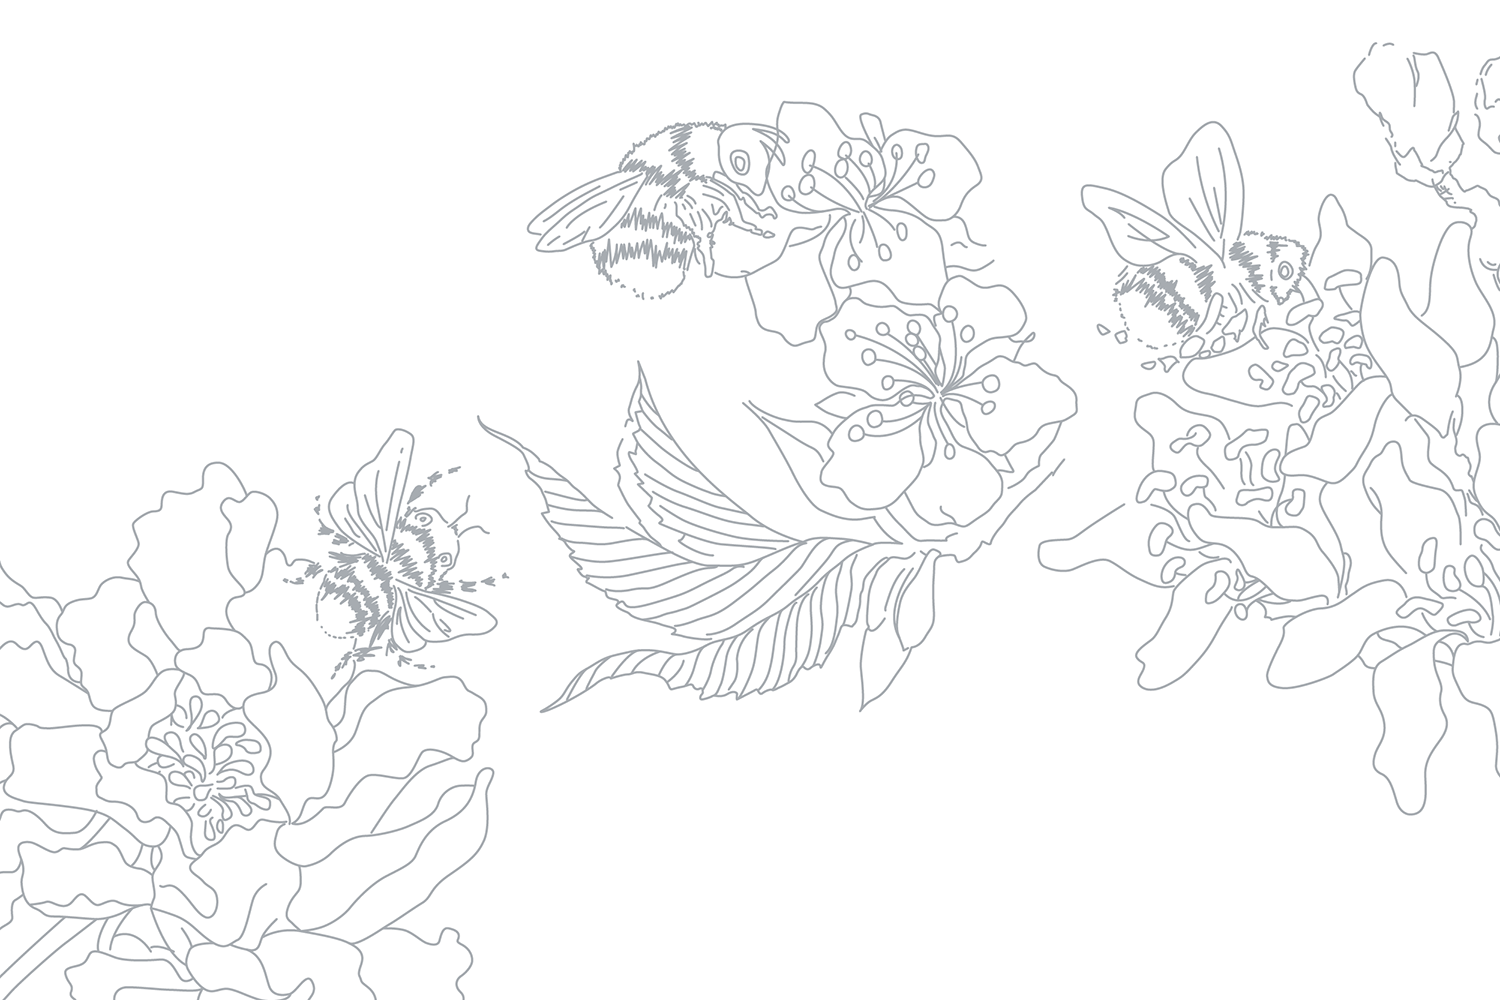 Apicare Bee and Flower Illustrations - Minimal Line Drawings